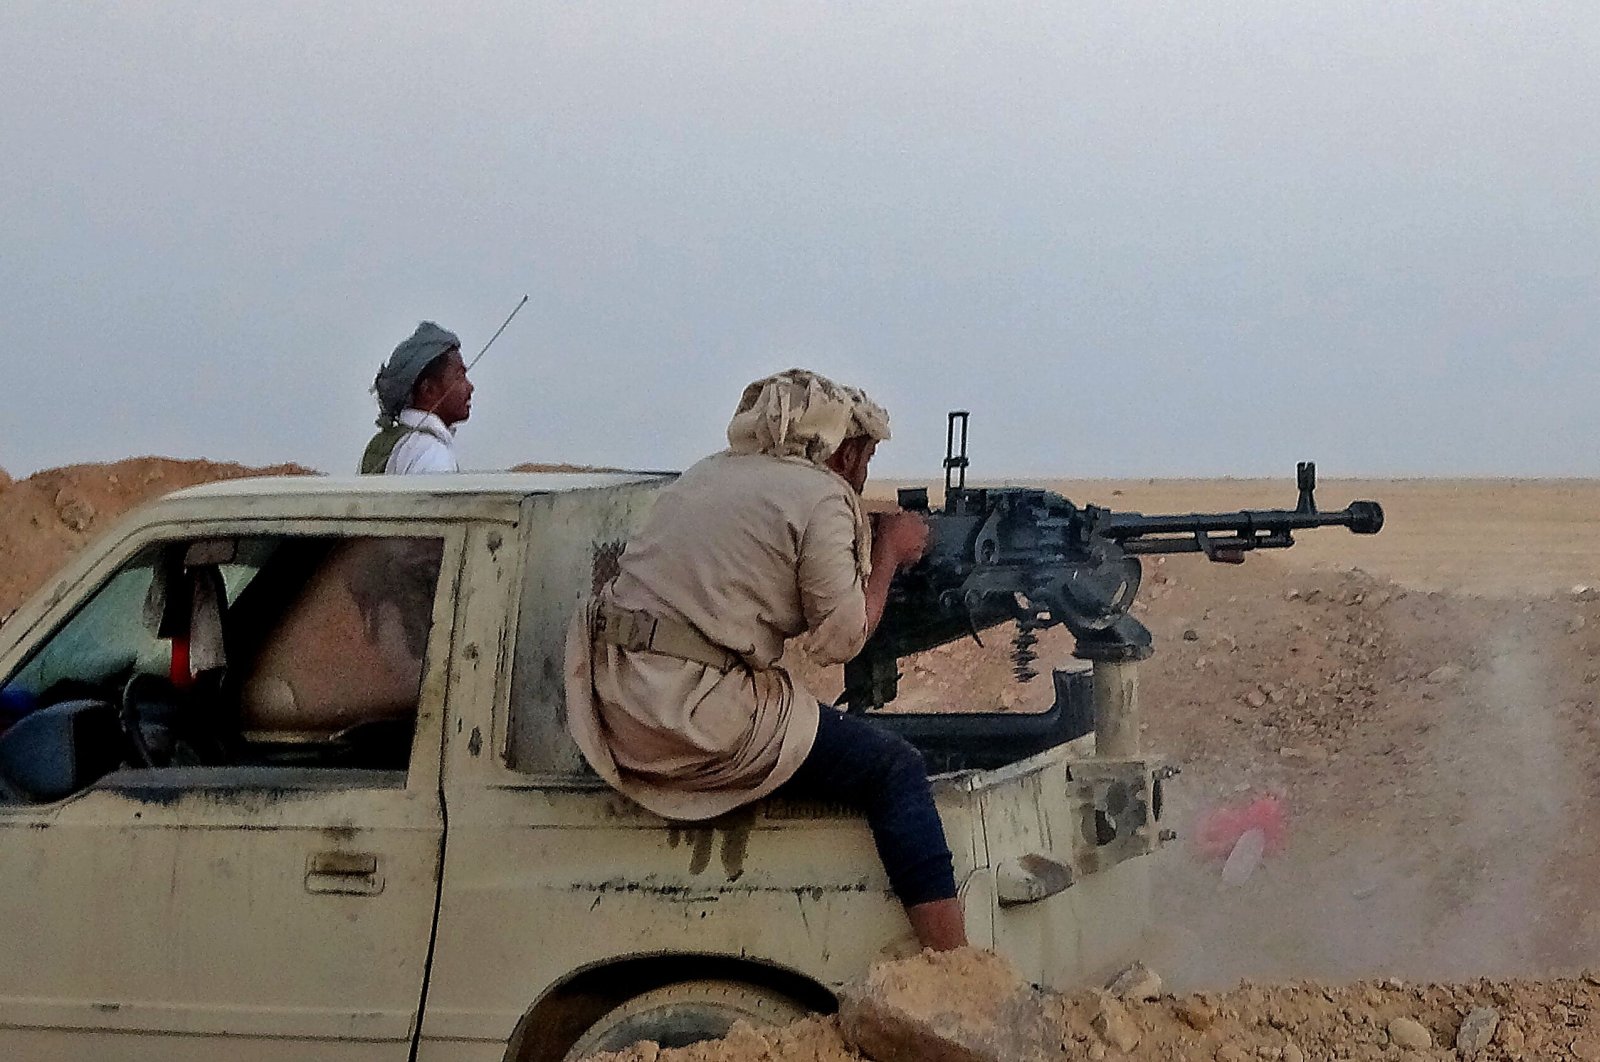 A combatant mans a heavy machine gun as forces loyal to Yemen's Saudi-backed government clash with Houthi fighters around the strategic "Mas Camp" military base, in al-Jadaan area, Yemen, Nov. 22, 2020. (AFP Photo)
